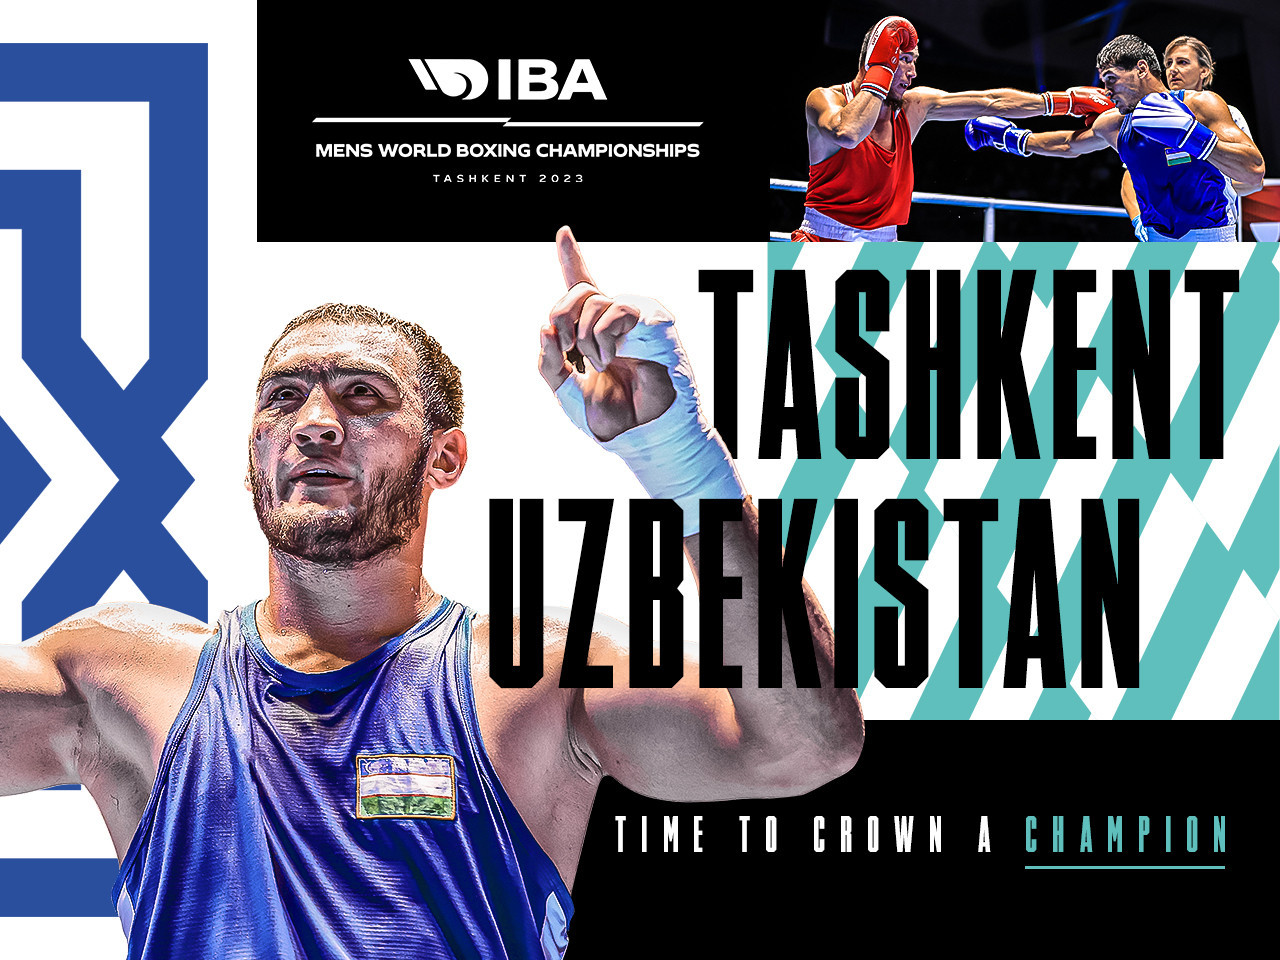 The IBA has revealed 104 countries have registered athletes for the Men's World Boxing Championships in Tashkent ©IBA